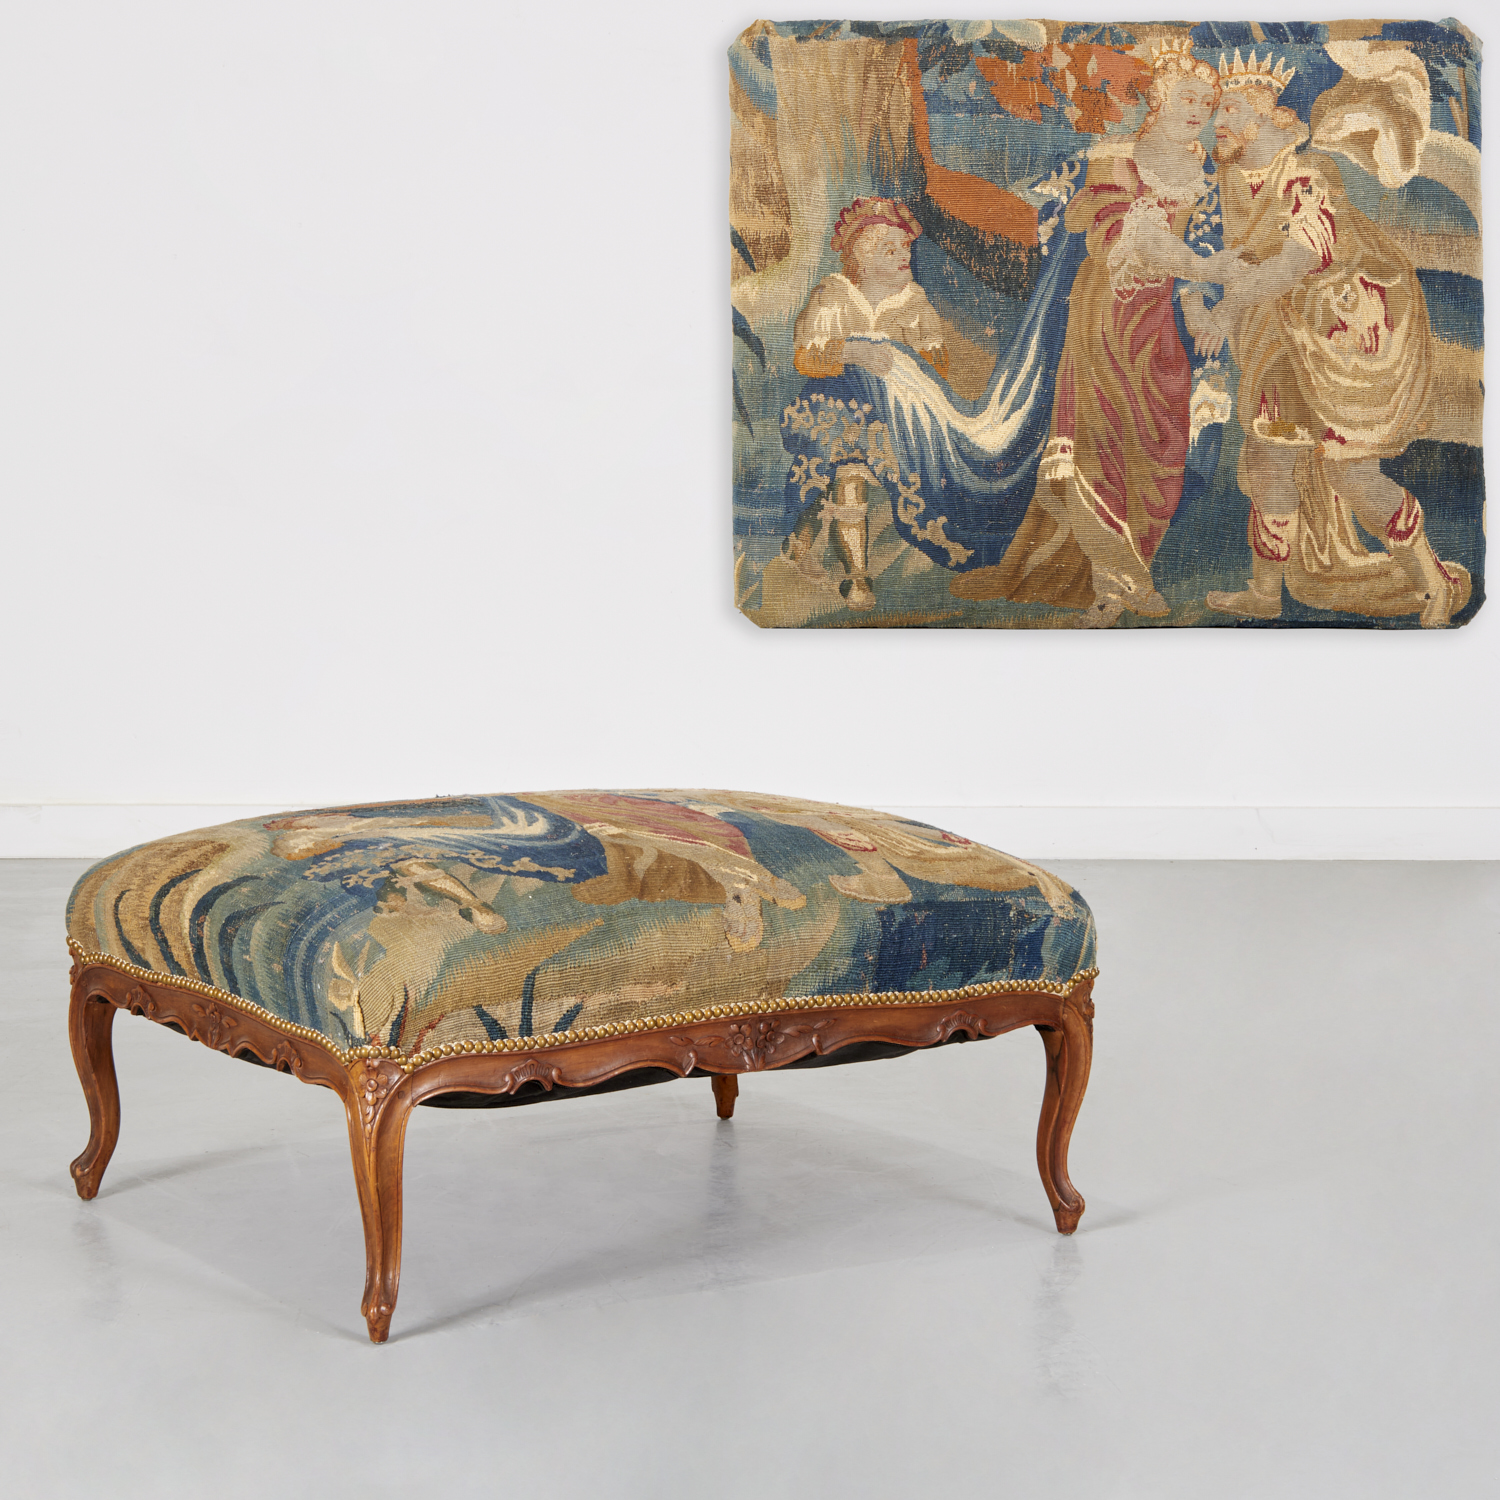 NICE LOUIS XV STYLE TAPESTRY OTTOMAN